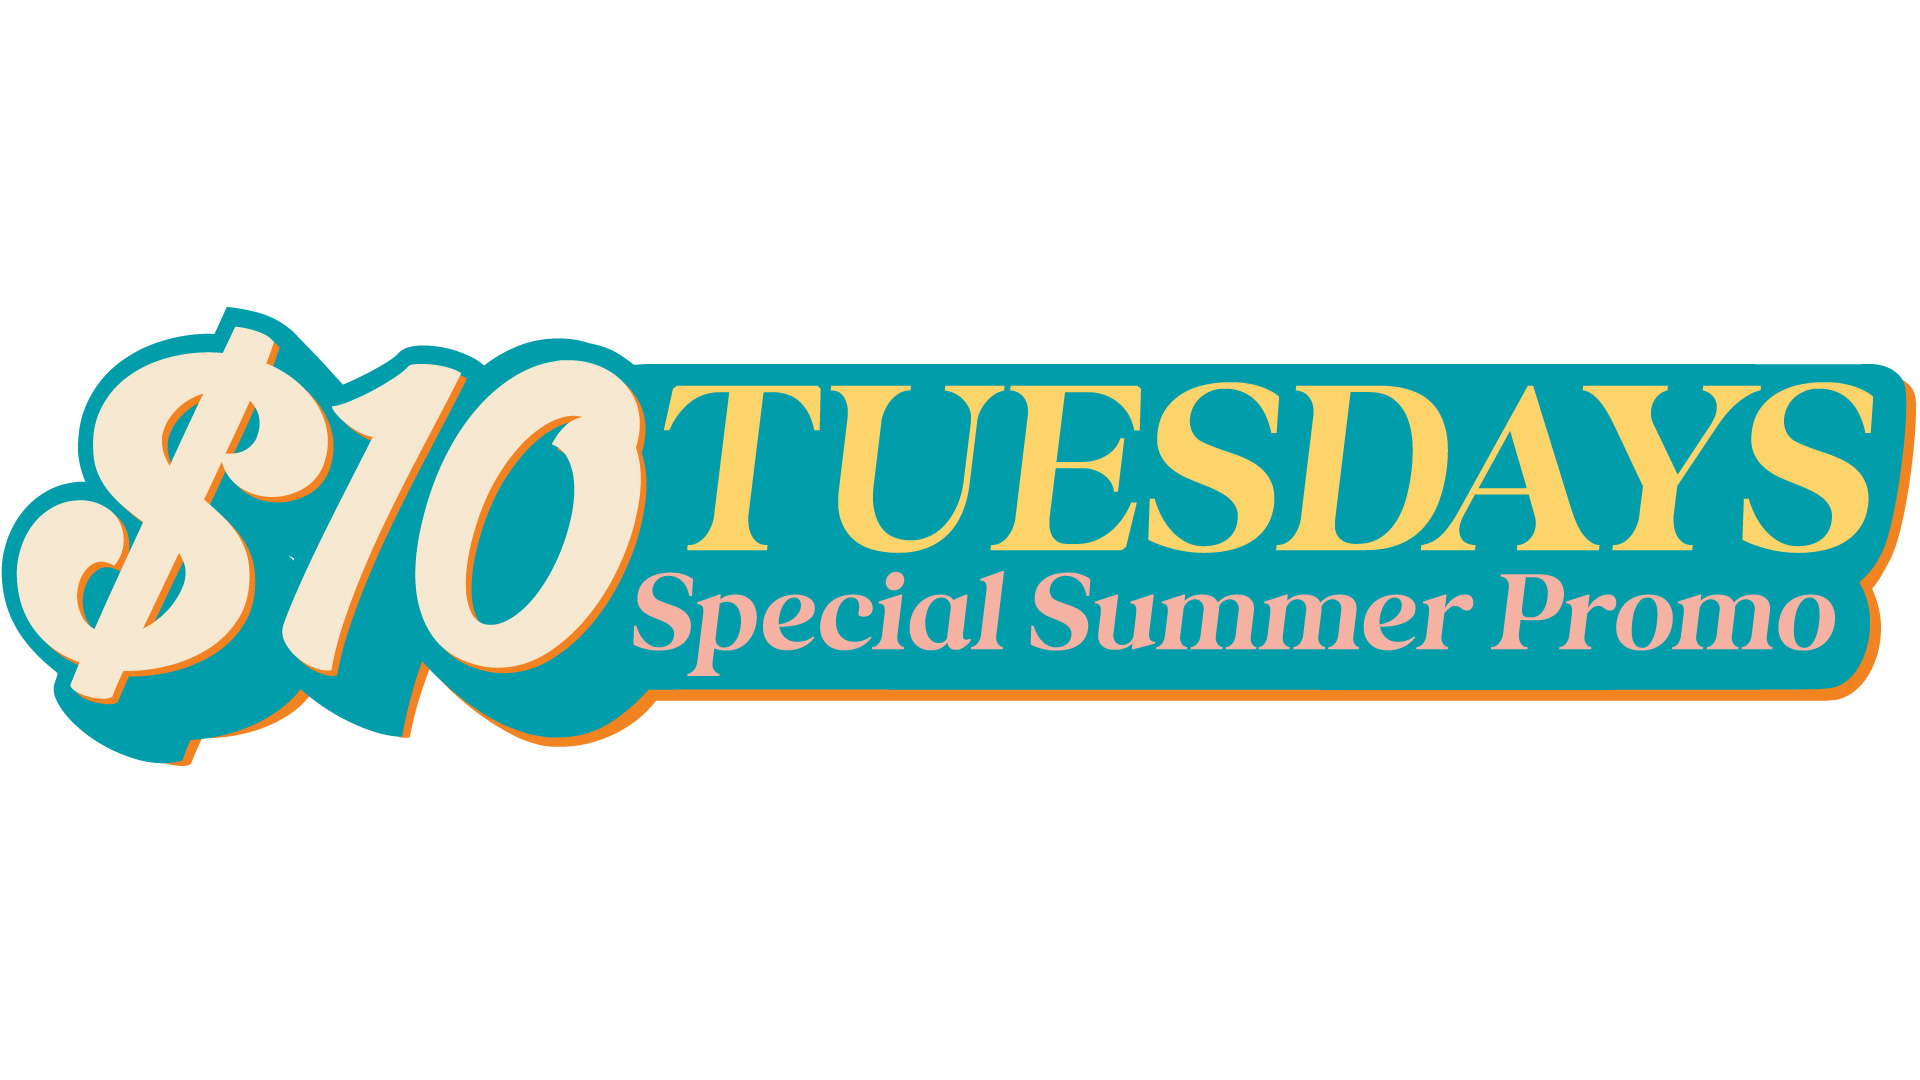 10 dollar tuesdays retro graphic that says special summer promo